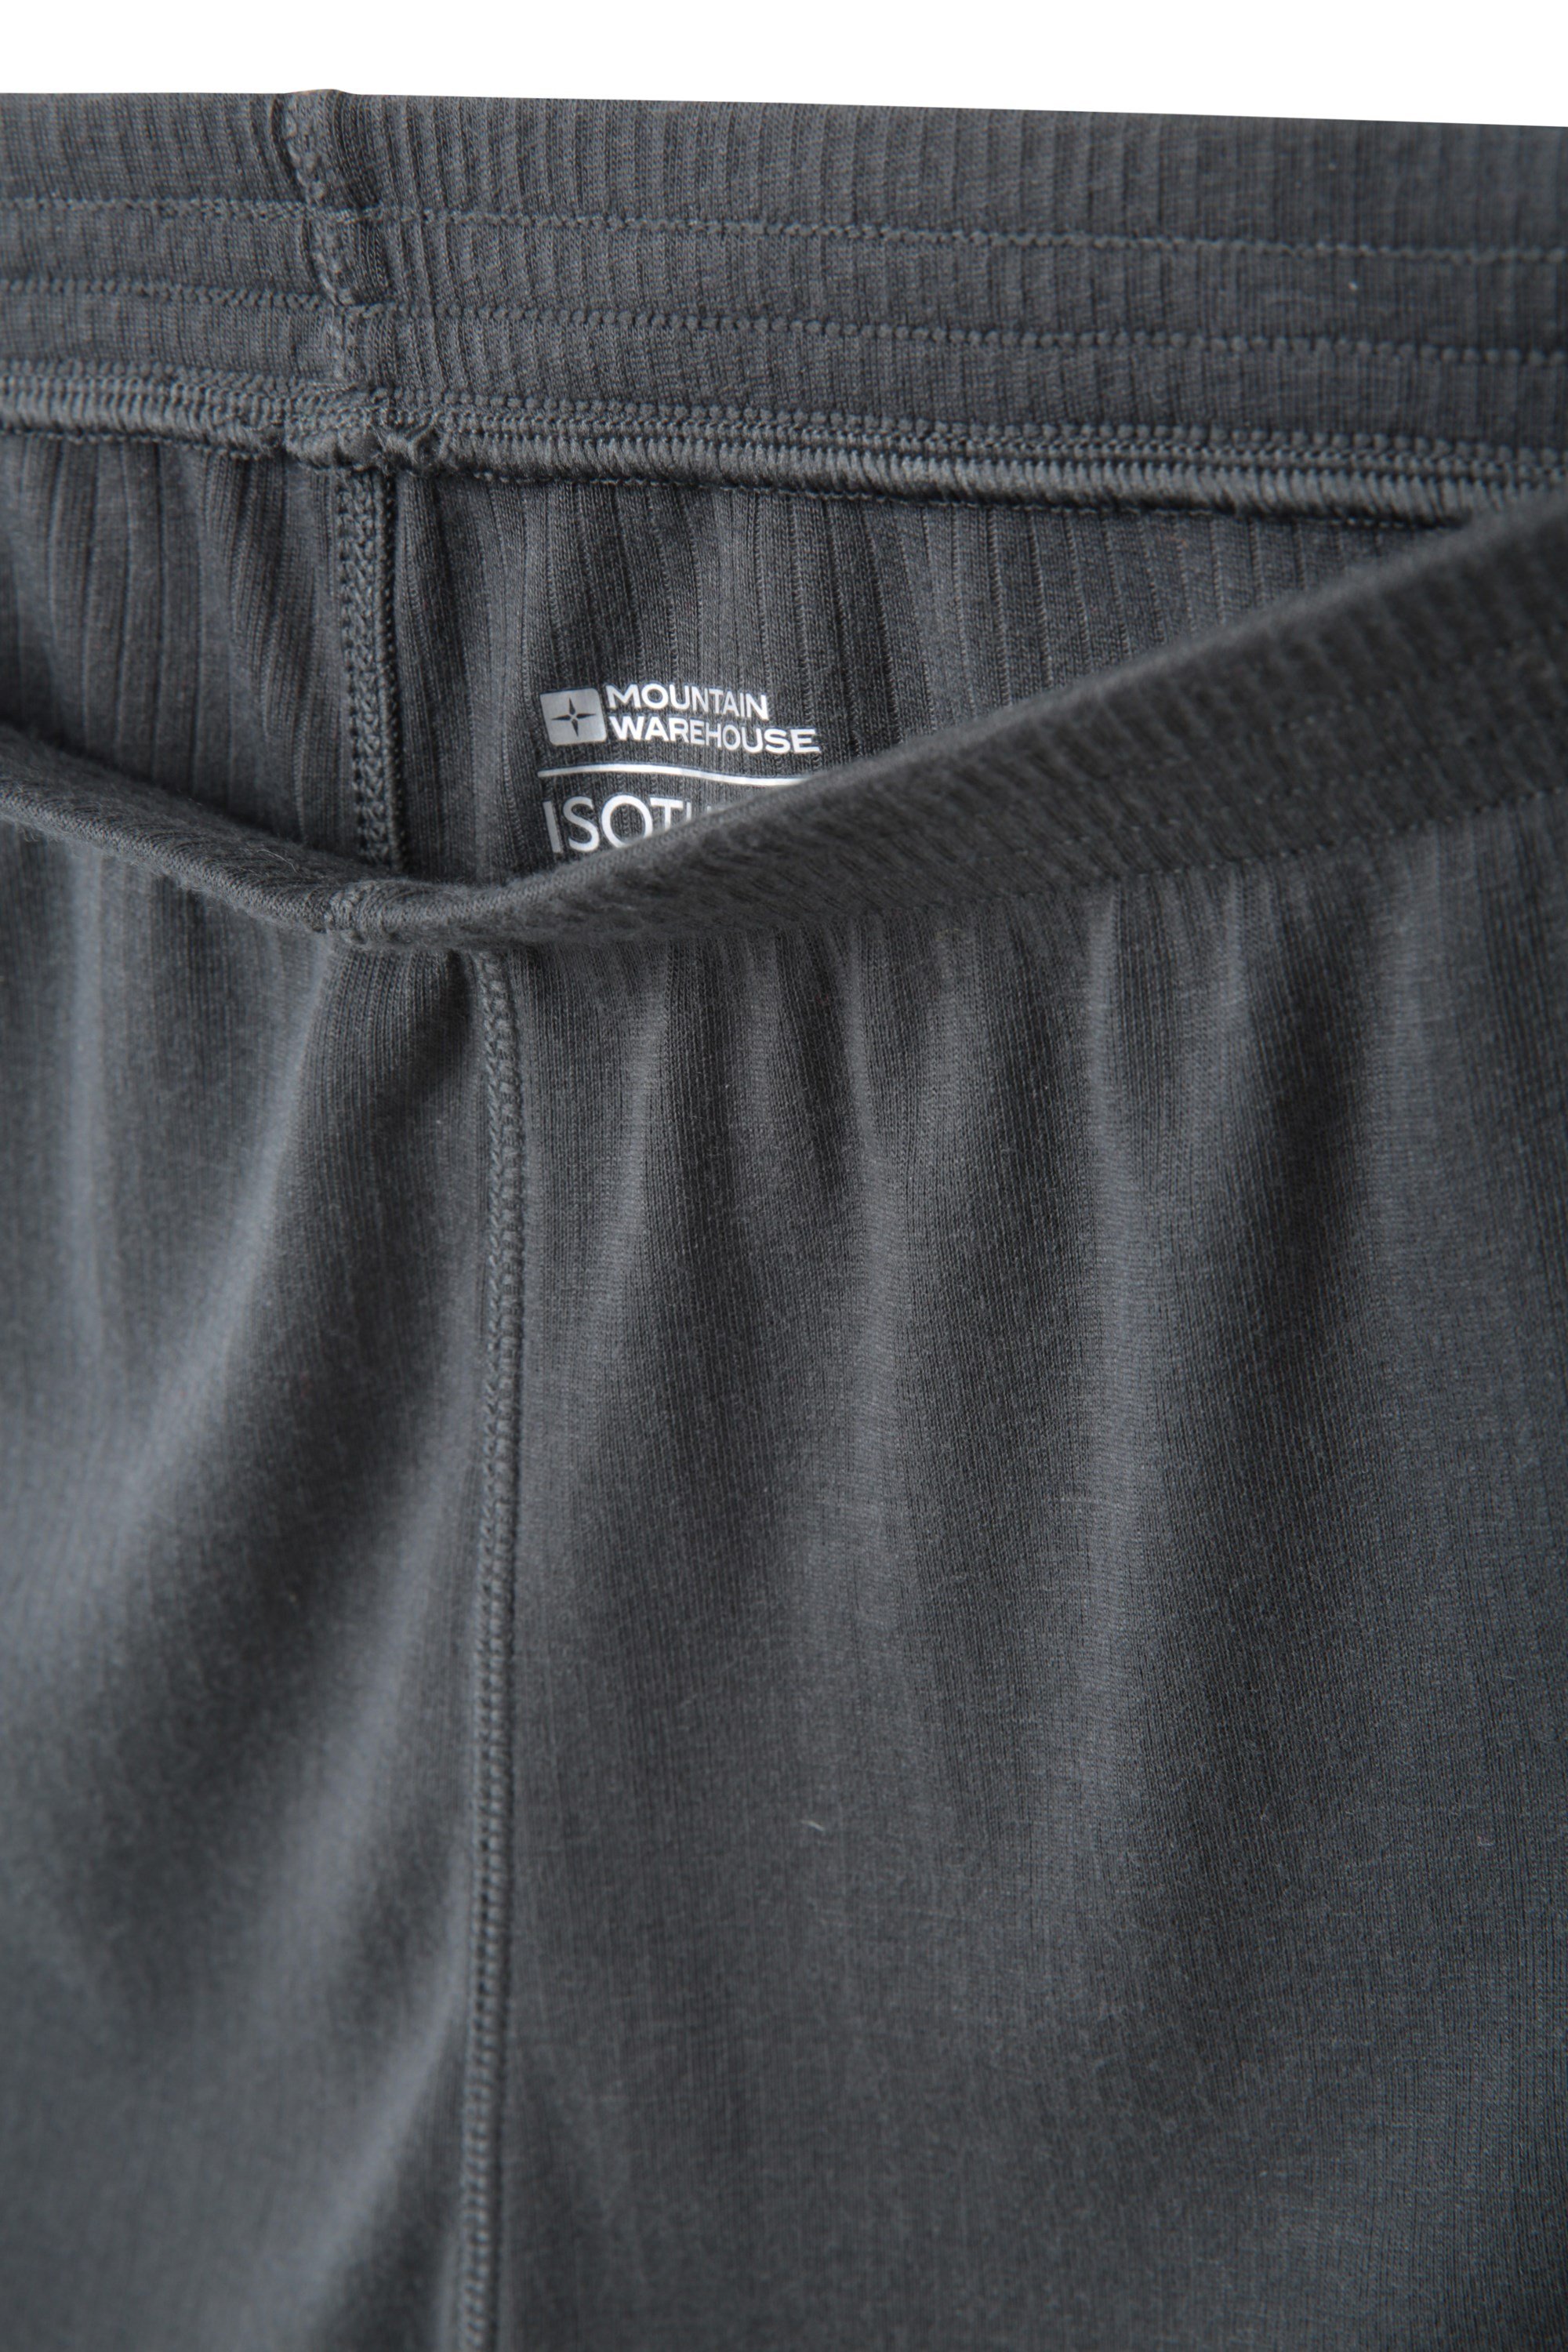 Mountain Warehouse Black NEW Various Mens Isotherm Merino pant or top